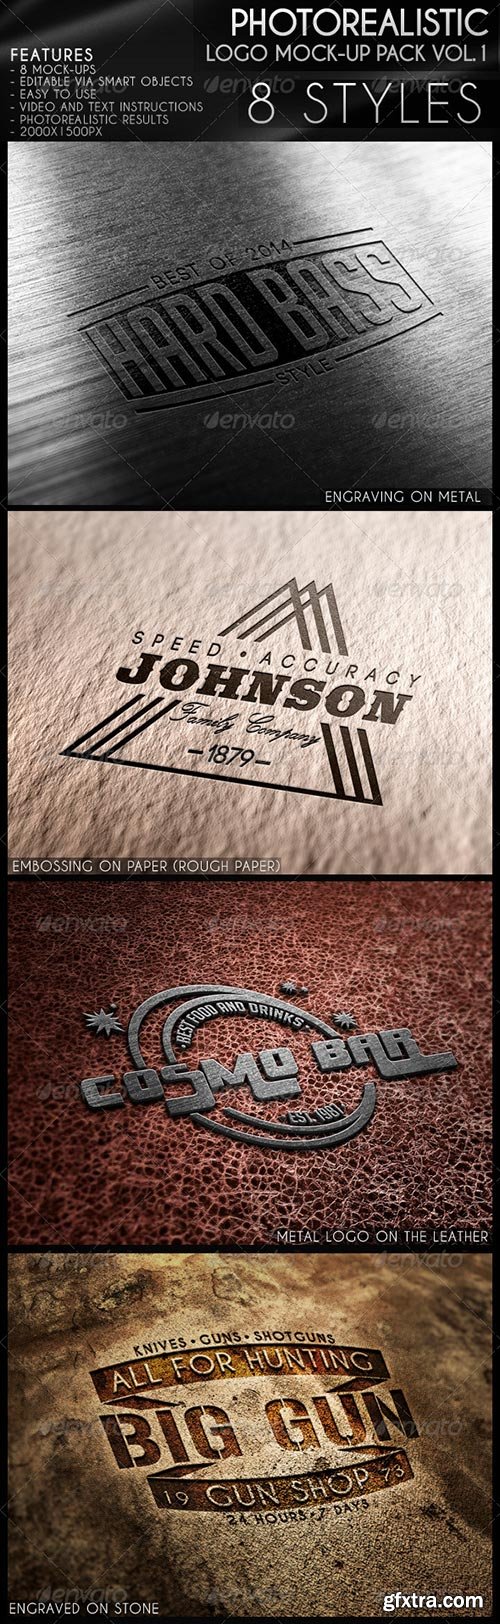 GraphicRiver - Photorealistic Logo Mock-Up Pack Vol.1 6043429